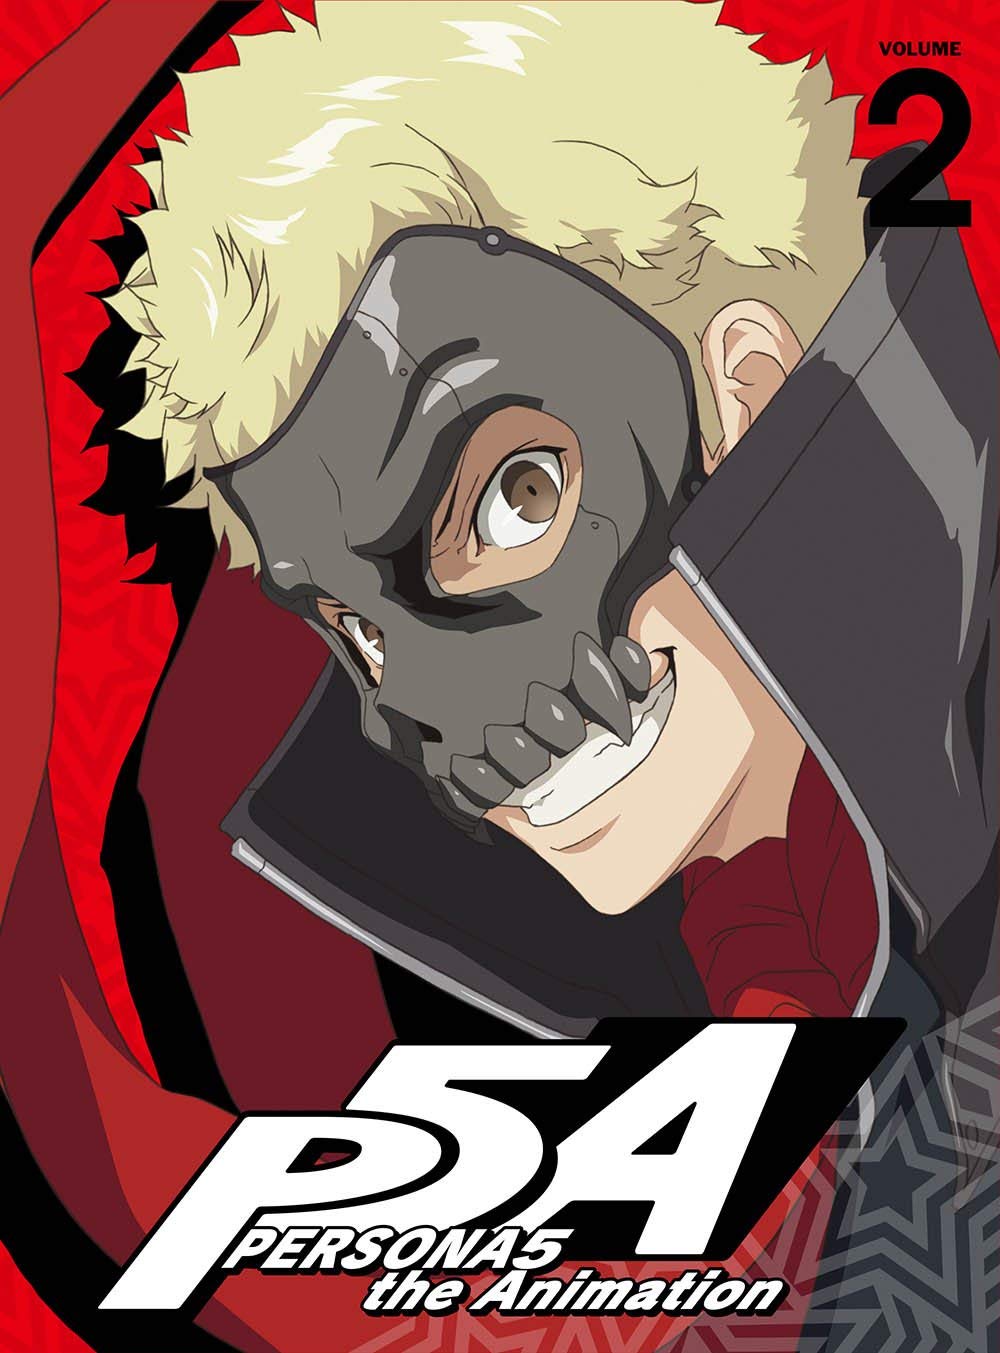 Persona 5 The Animation Vol 2 Limited Edition